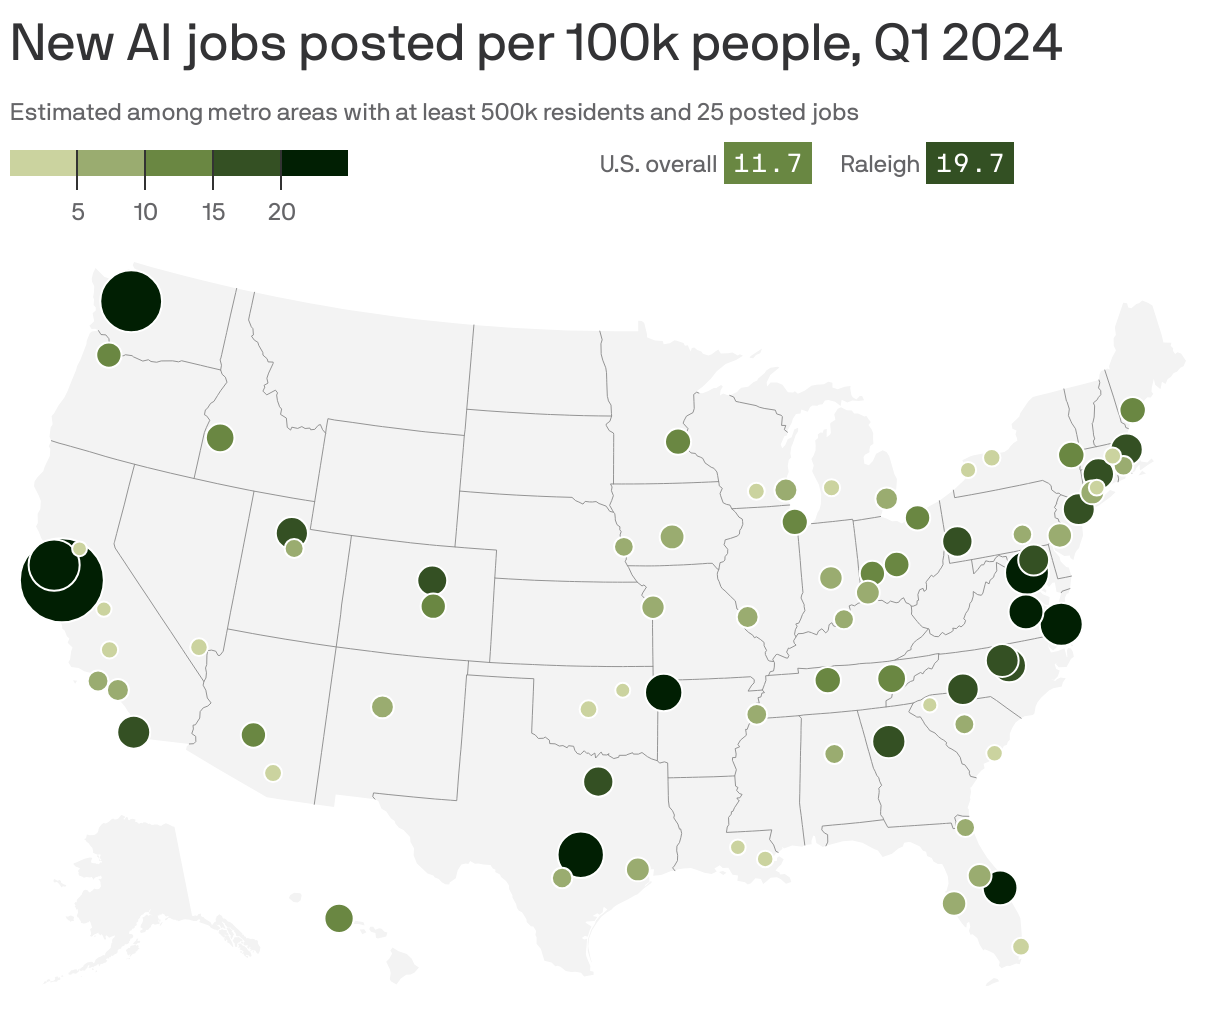 New AI jobs posted per 100k people, Q1 2024